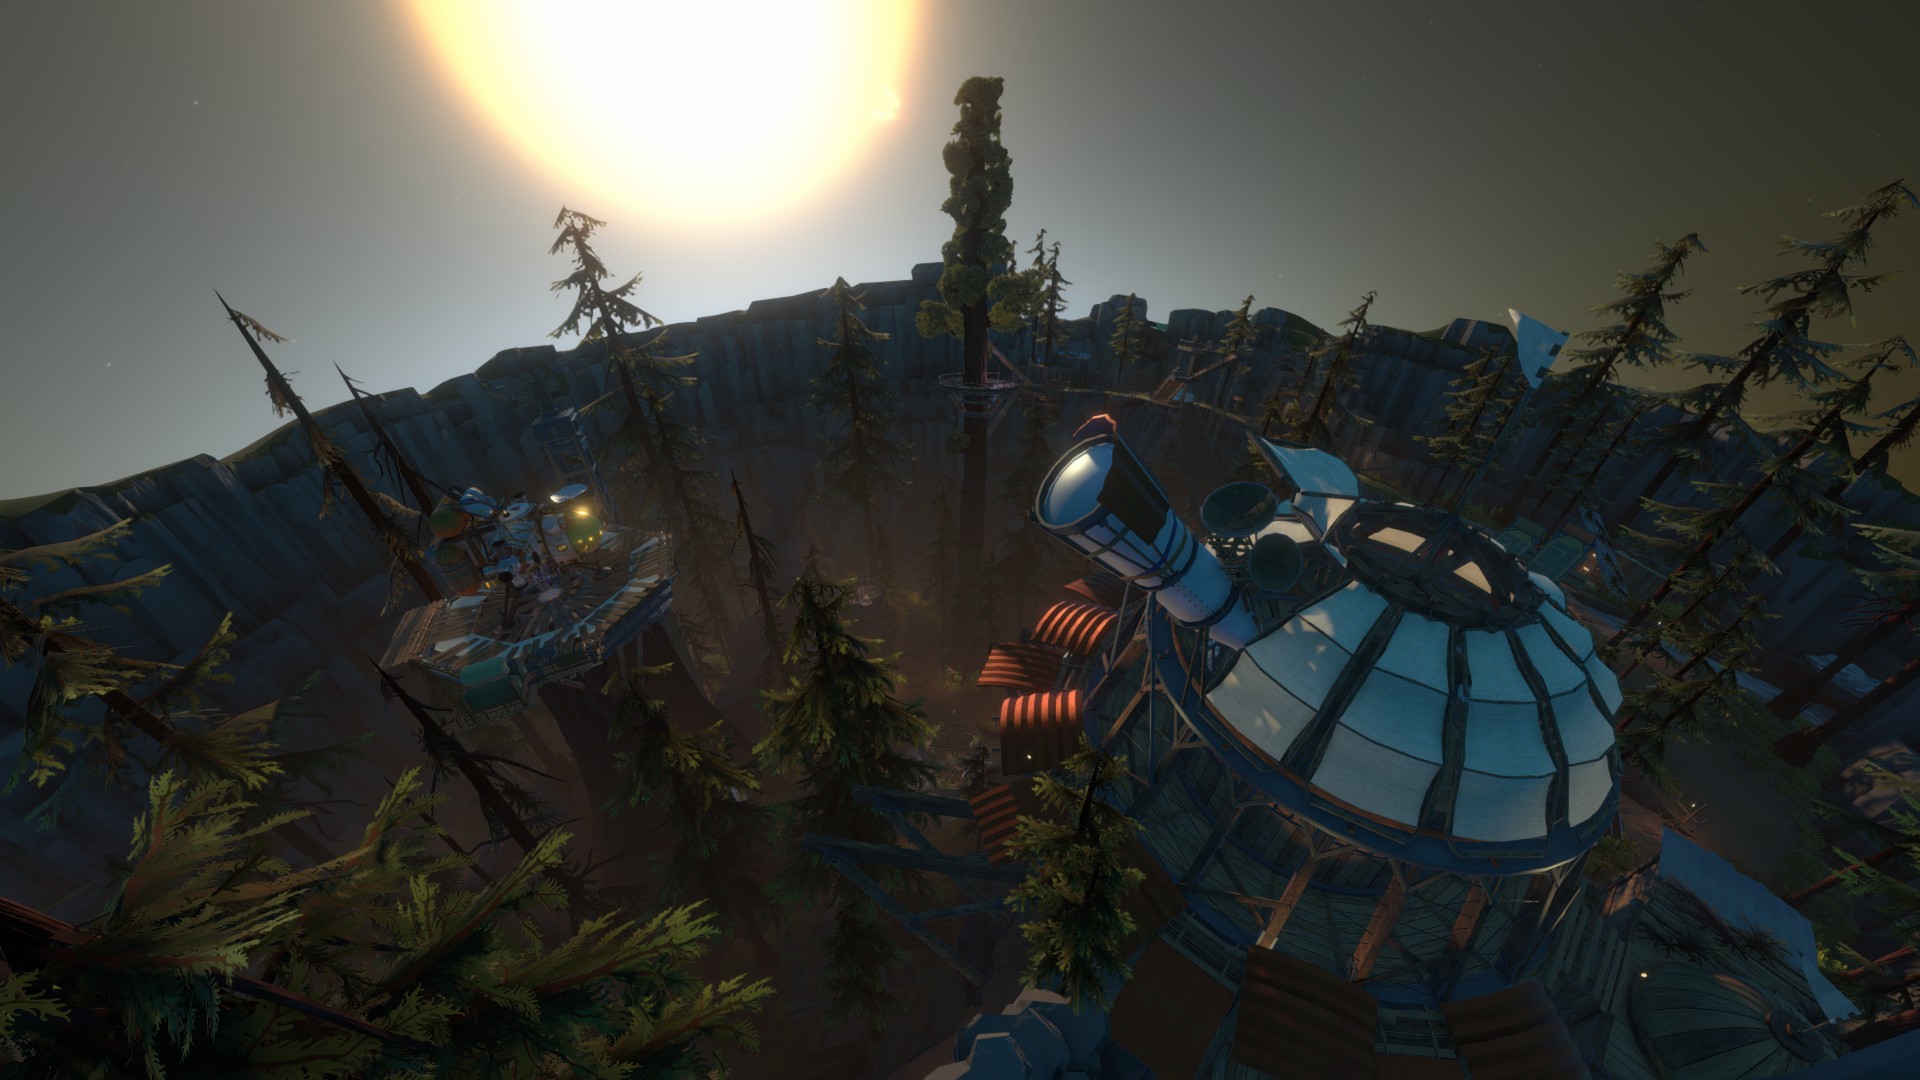 E3 2018: Explore a Hand-Crafted Solar System in Outer Wilds, Coming Soon to Xbox One